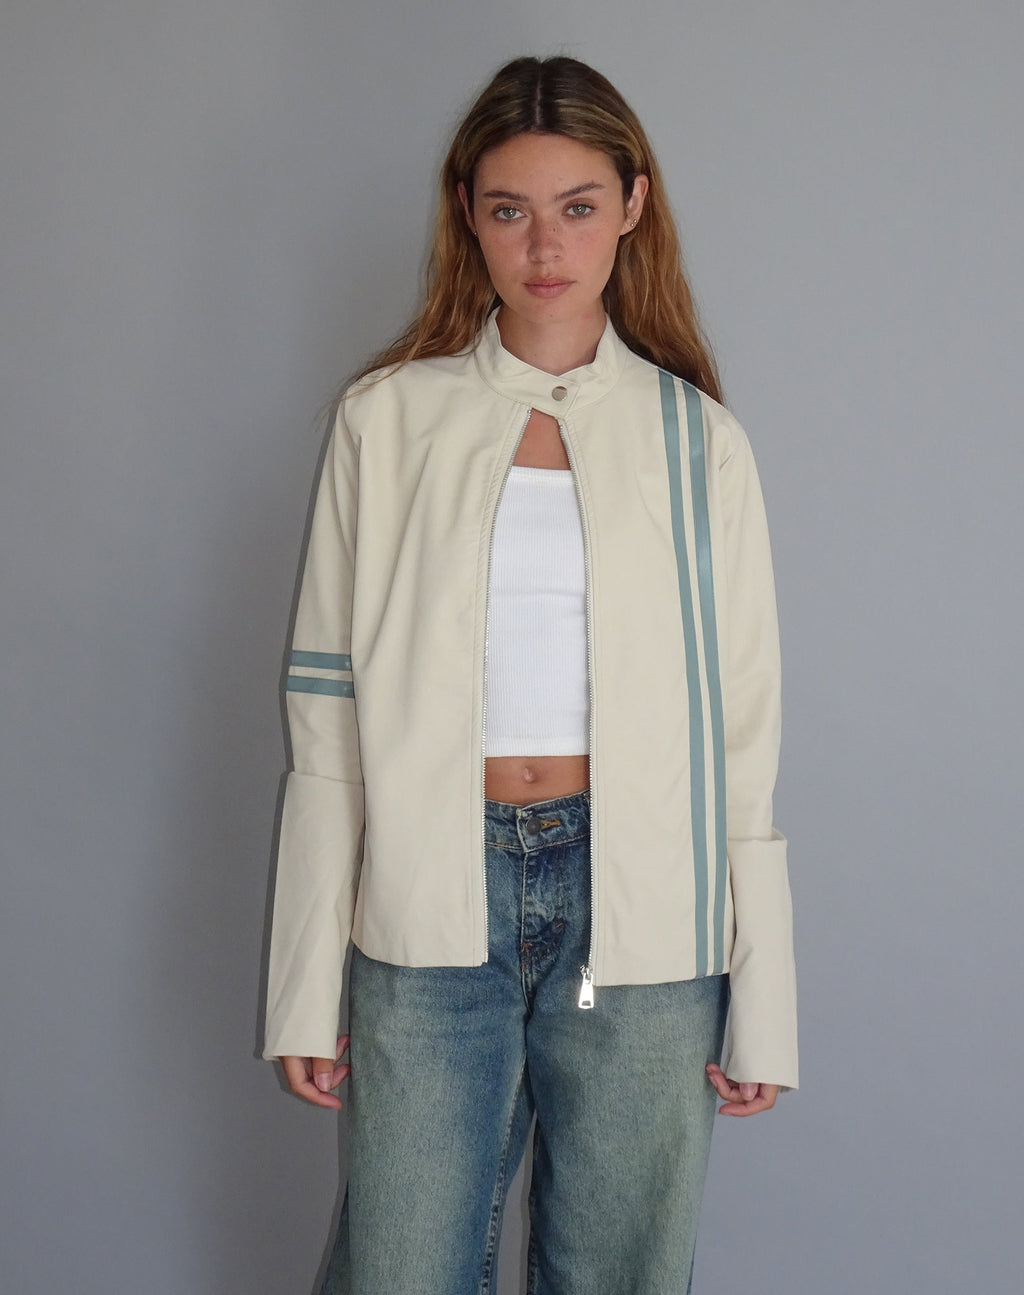 Lewis Jacket in Cream PU with Blue Stripe